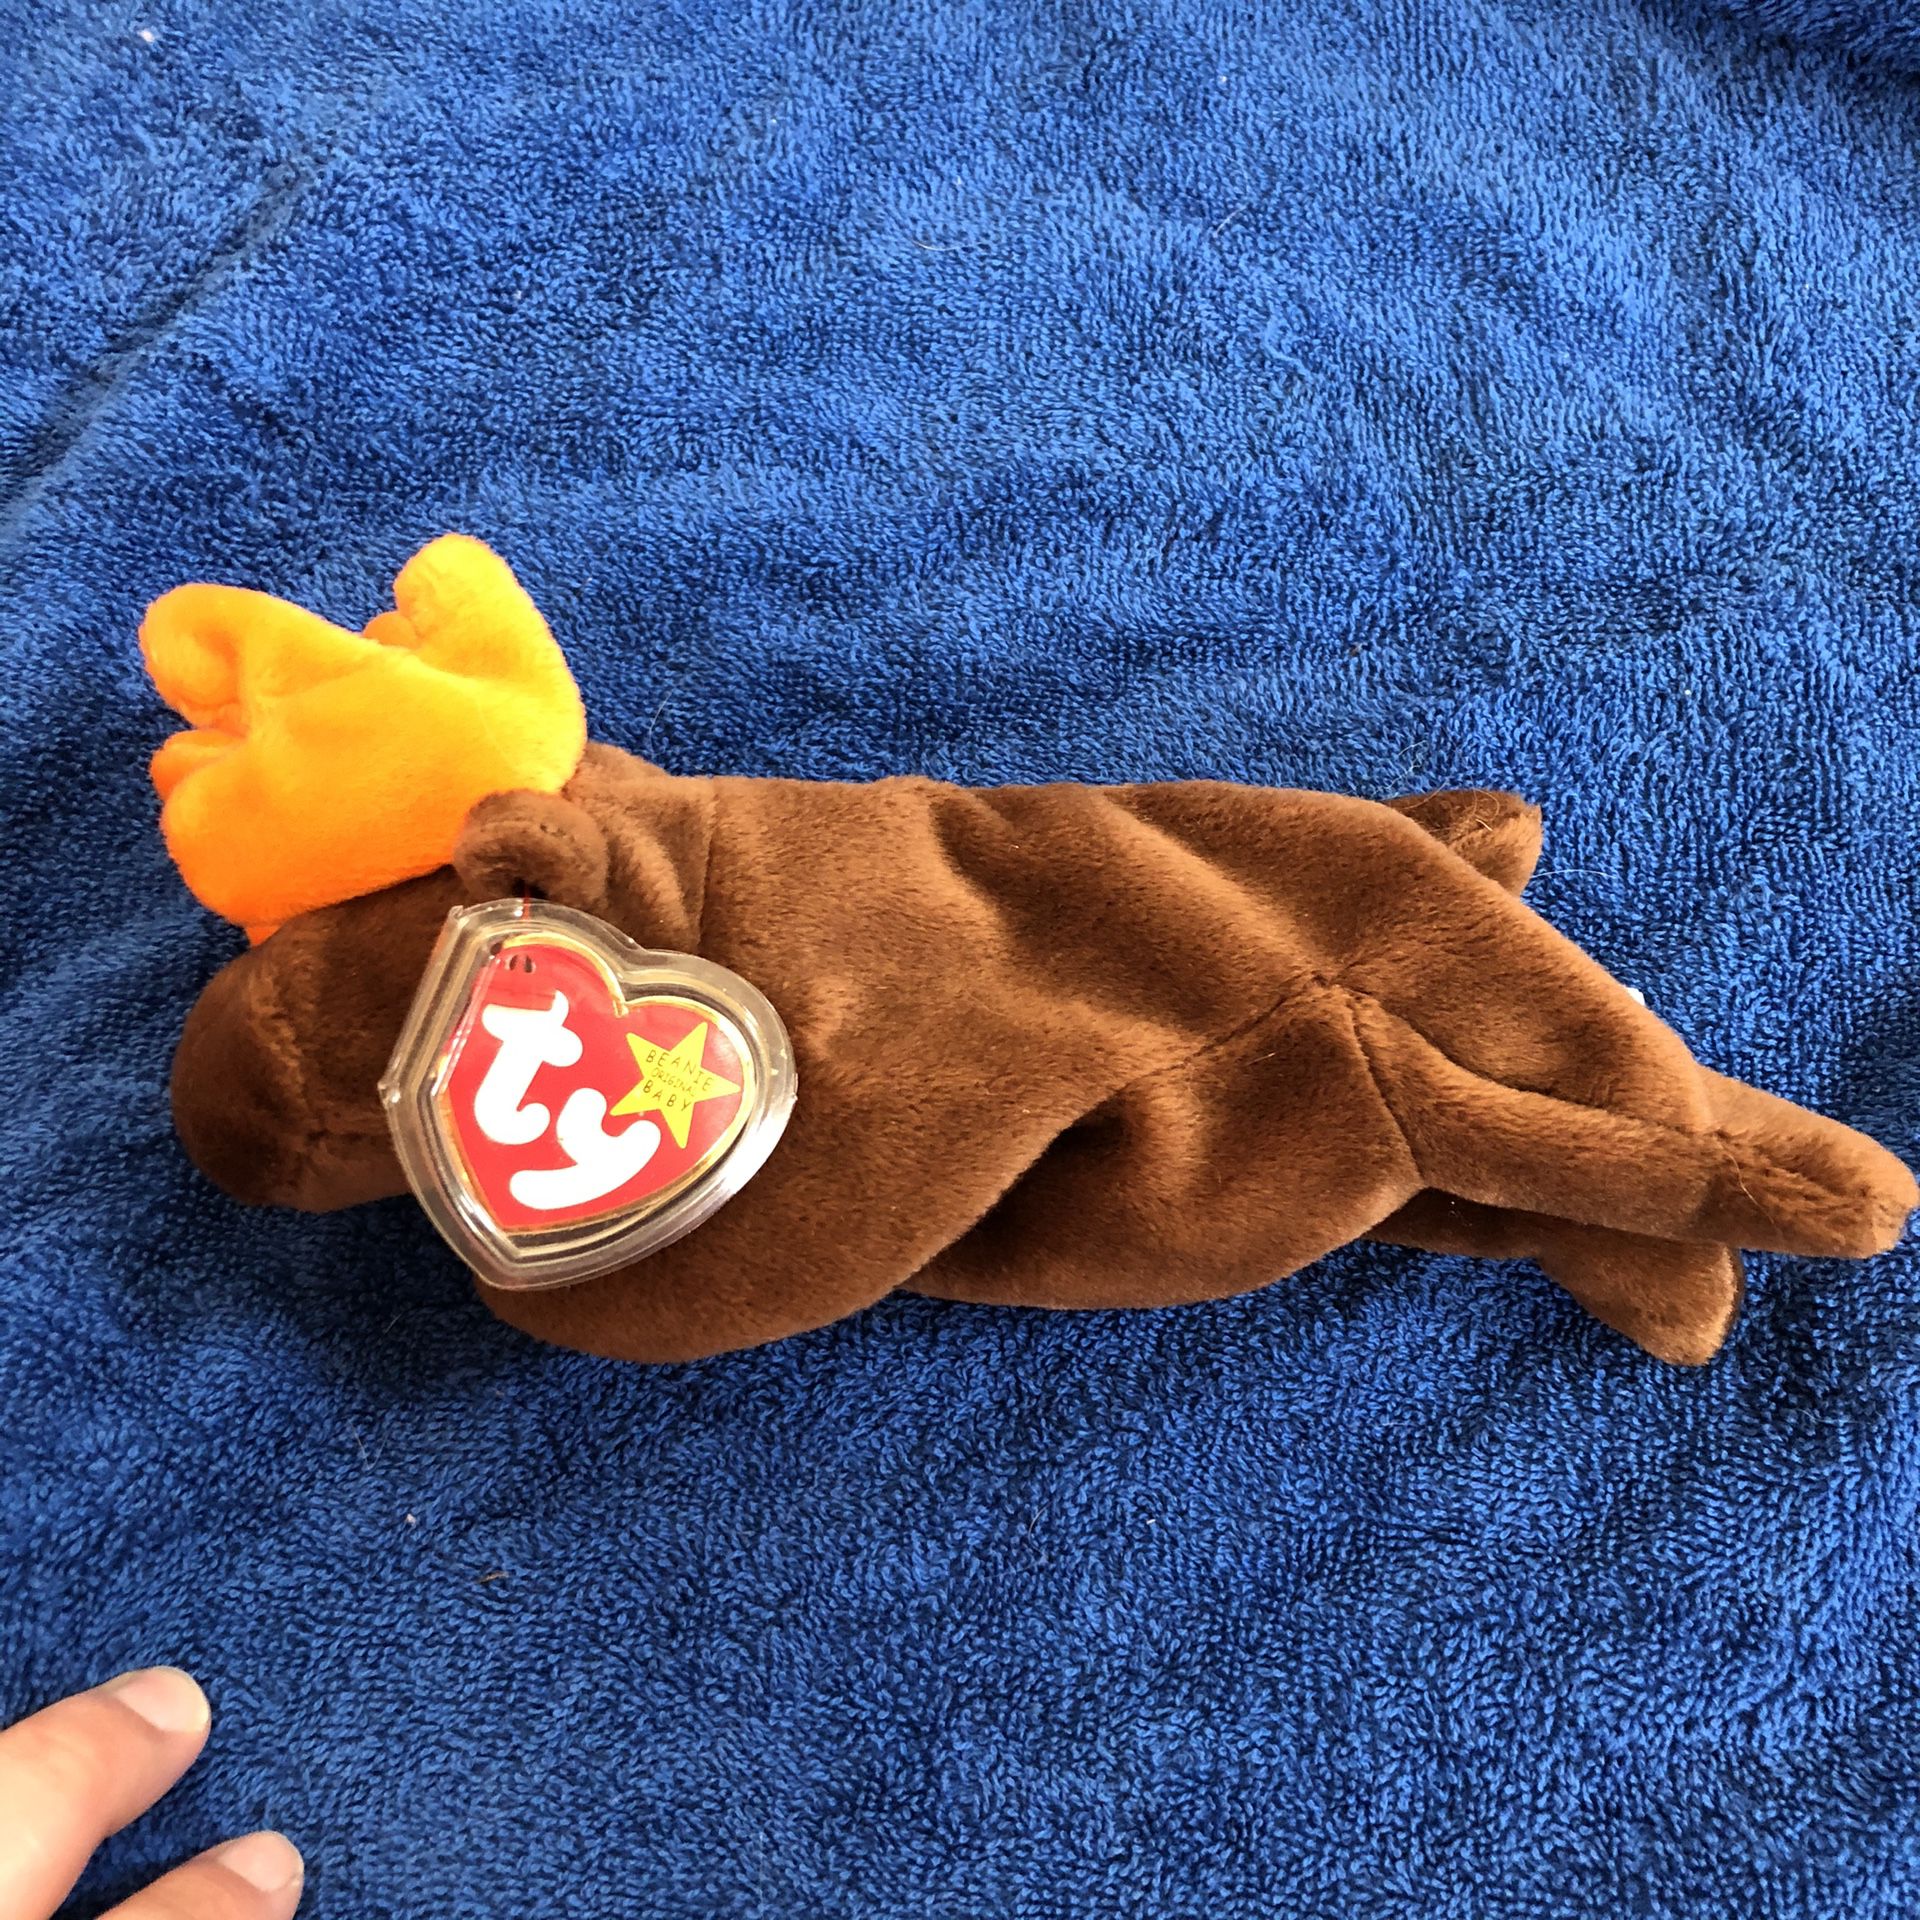 Moose beanie baby with tags